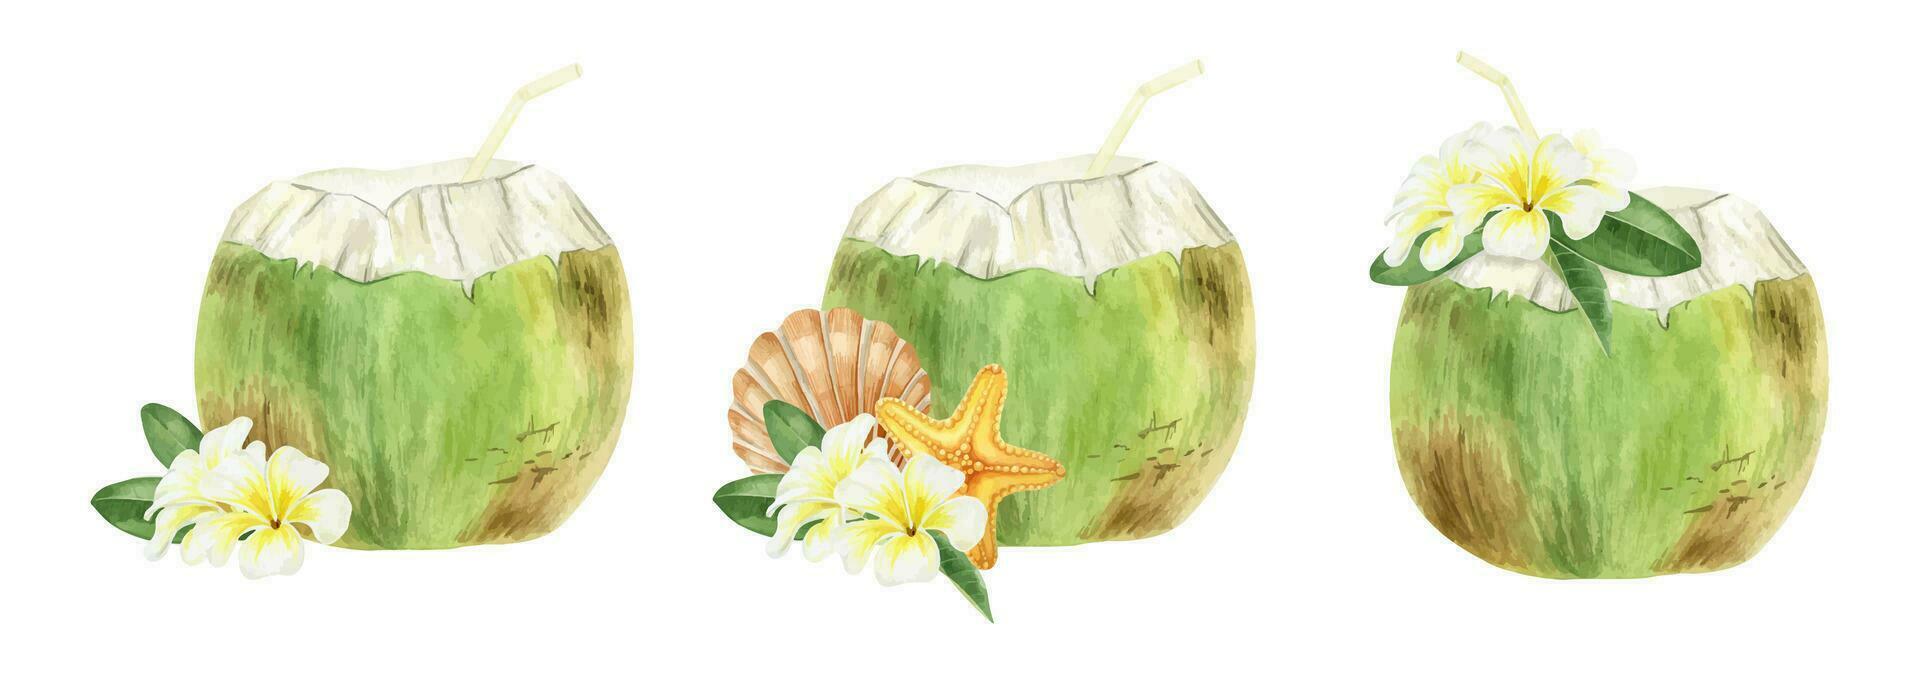 Set of coconut cocktails. Exotic drinks. Tropical cocktails with a straw and plumeria flowers. Isolated watercolor illustration. Food illustration for menu, design or print vector